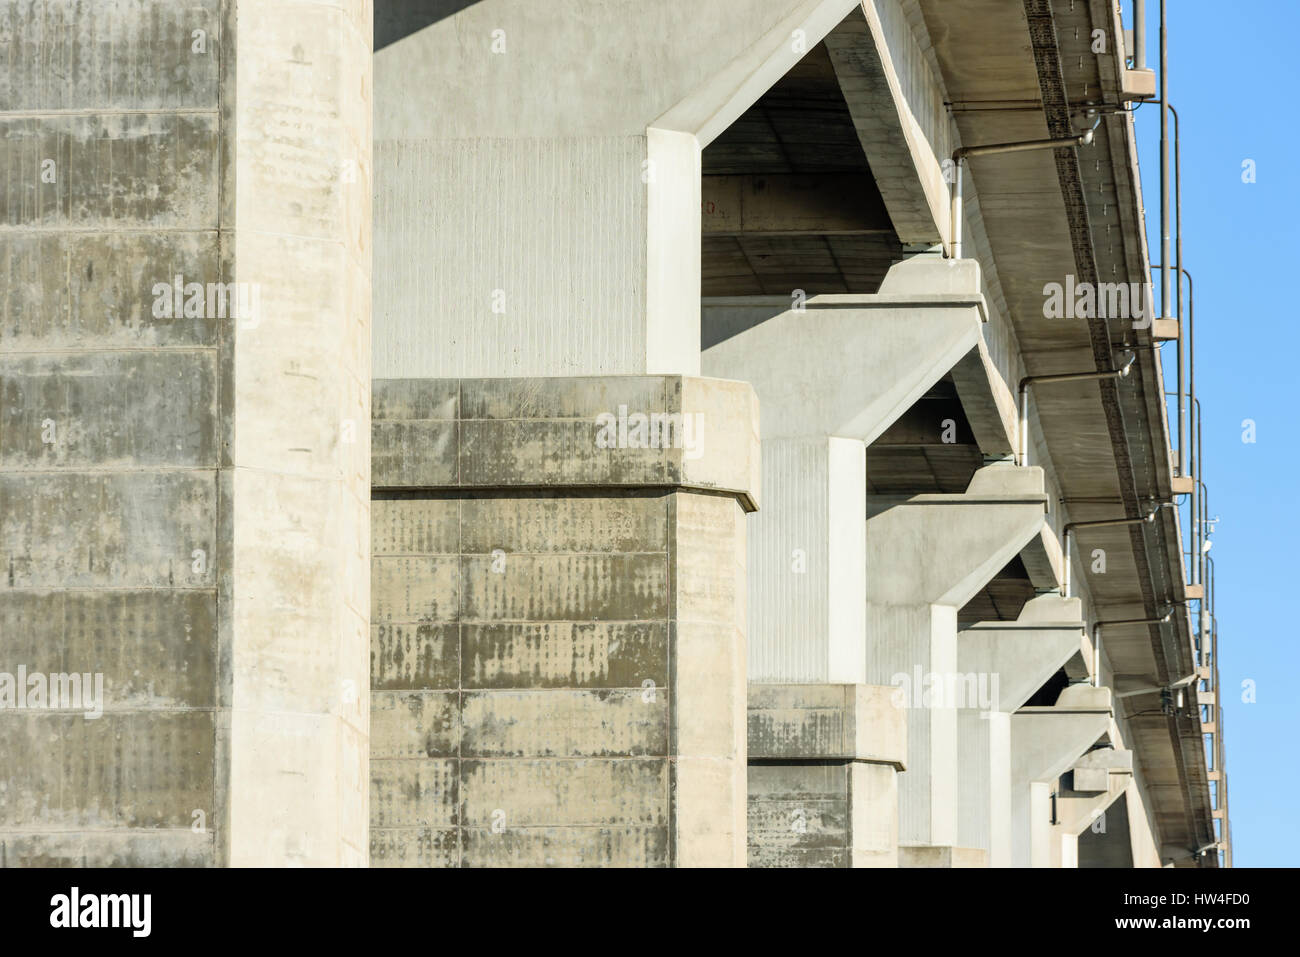 Underside of viaduct with gray concrete pillars, drainpipes and protruding road. Stock Photo